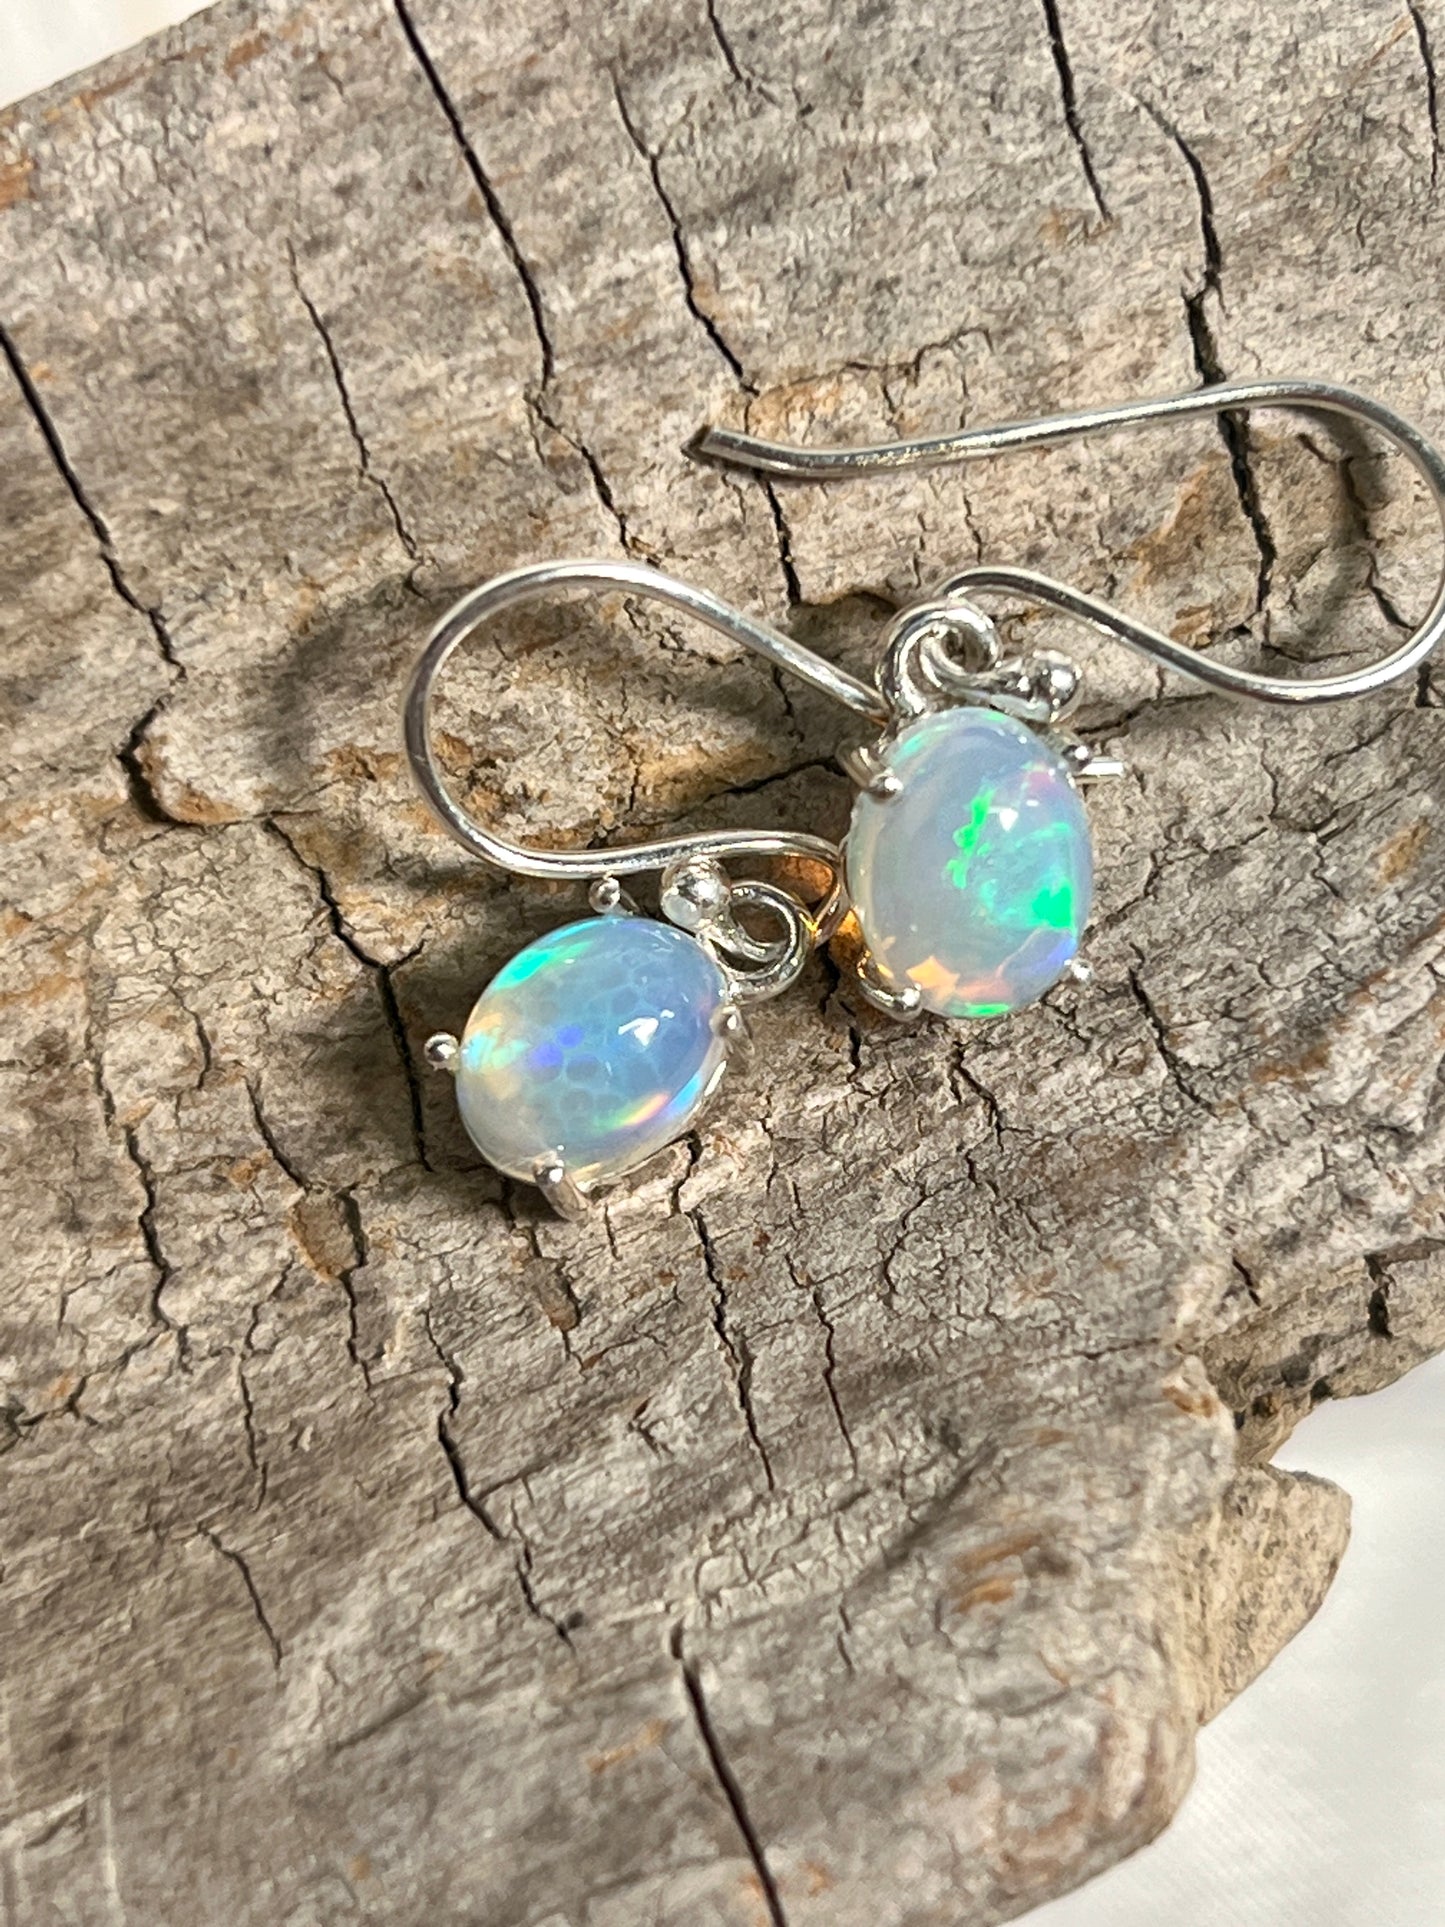 
                  
                    A pair of Super Silver Vibrant Oval Ethiopian Opal Earrings, with vibrant hues and natural brilliance, delicately displayed on a piece of wood.
                  
                